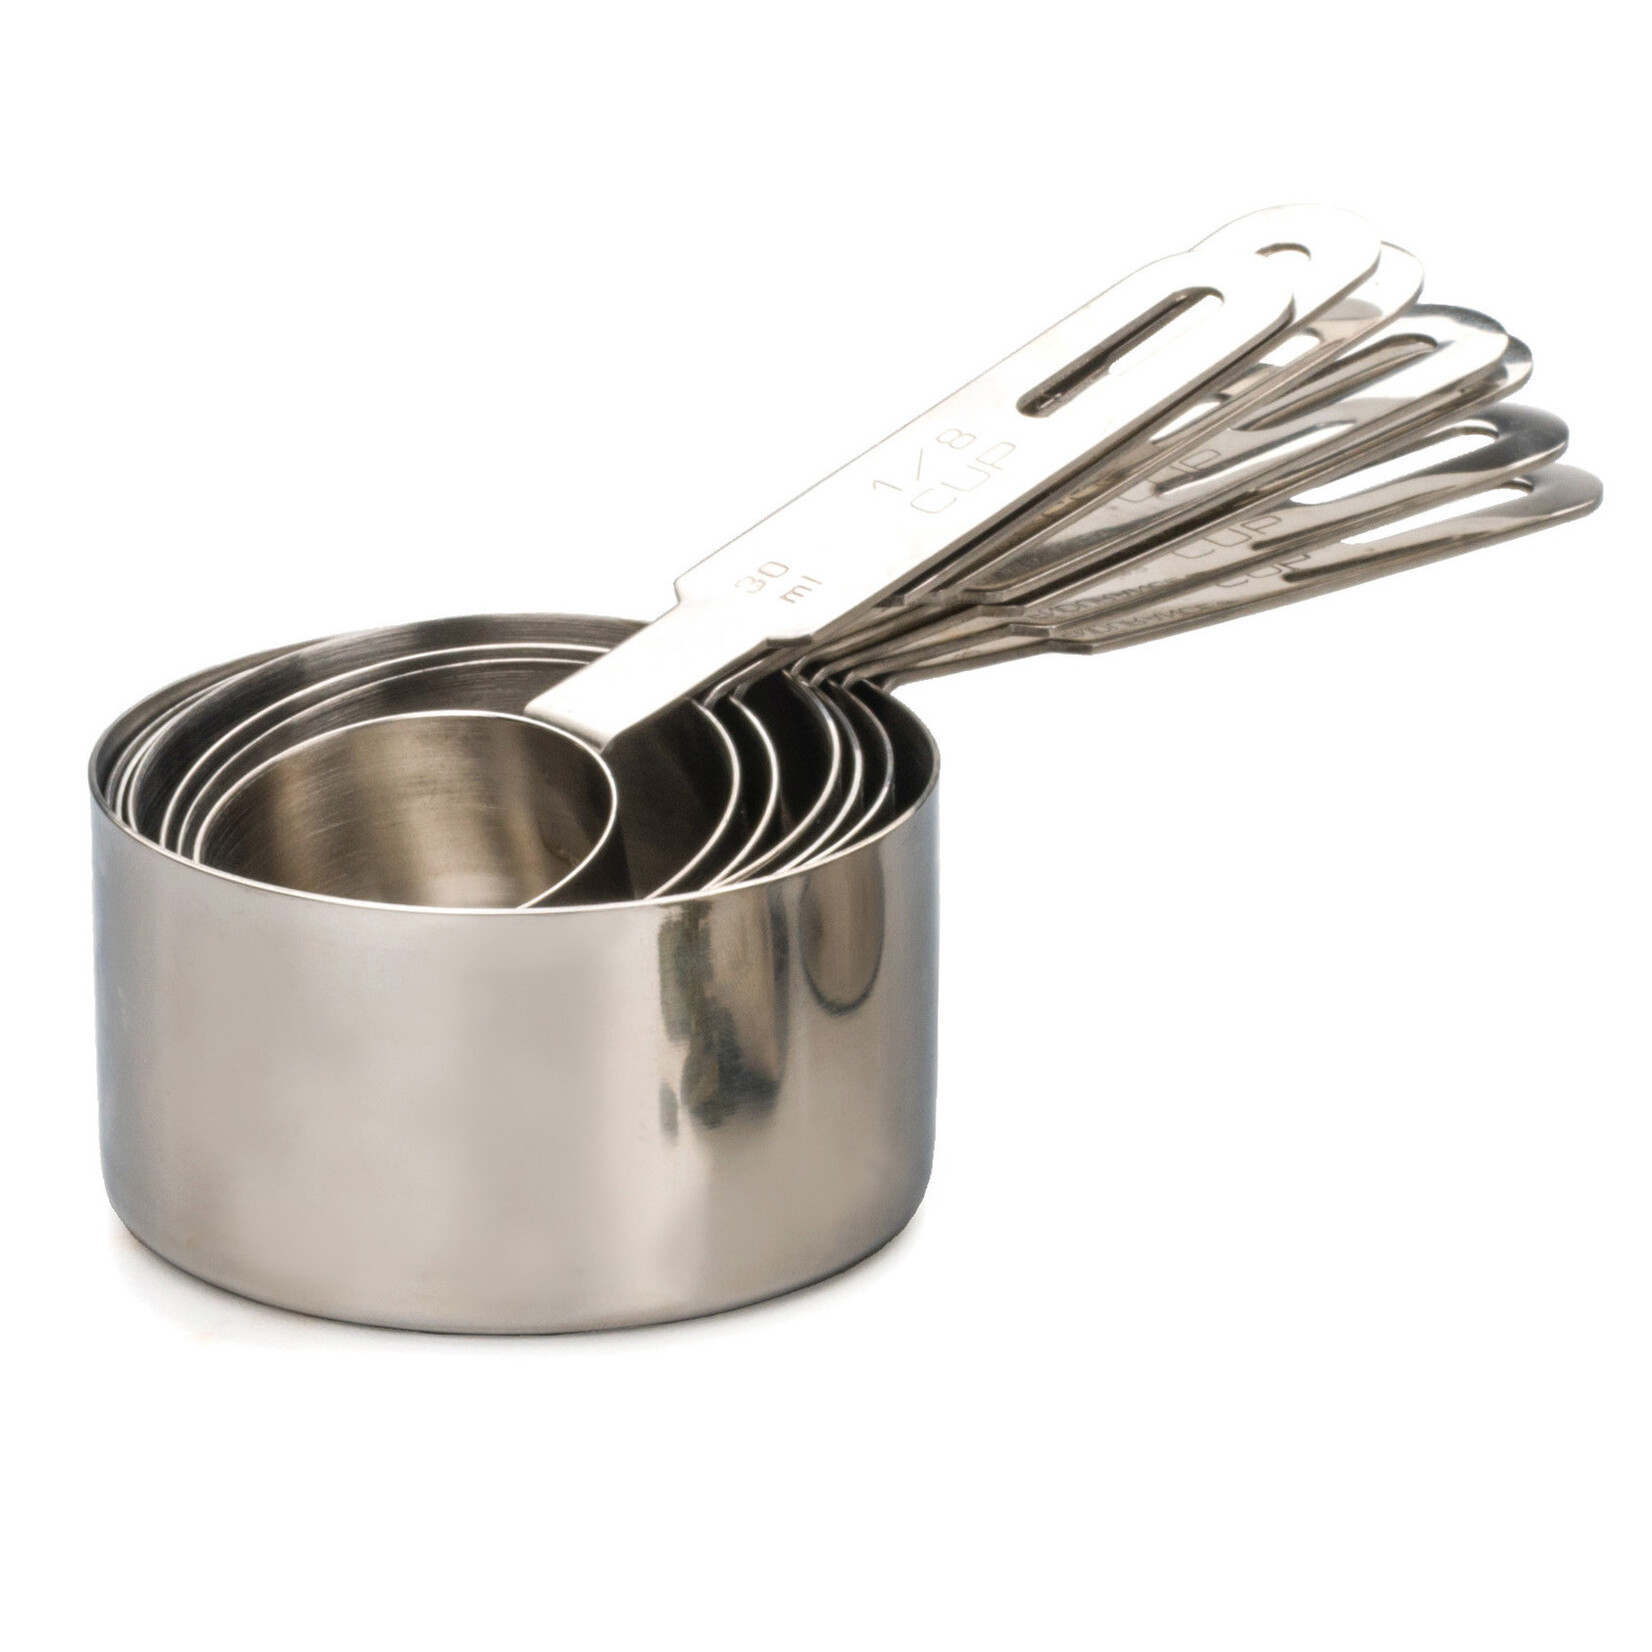 Stainless Steel Measure Cups